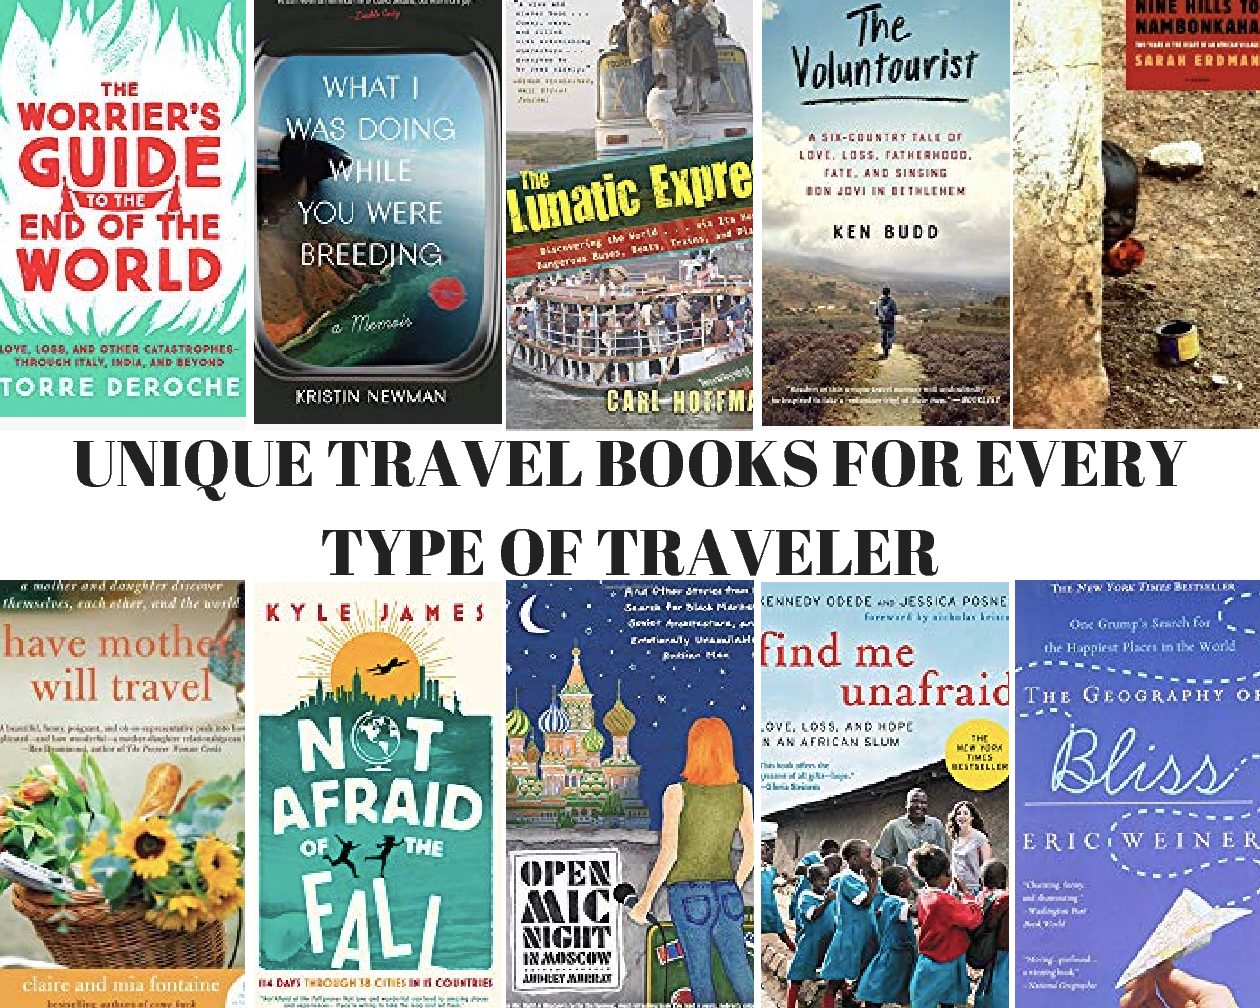 The Best Travel Books To Read During Self-Isolation - Elite Traveler